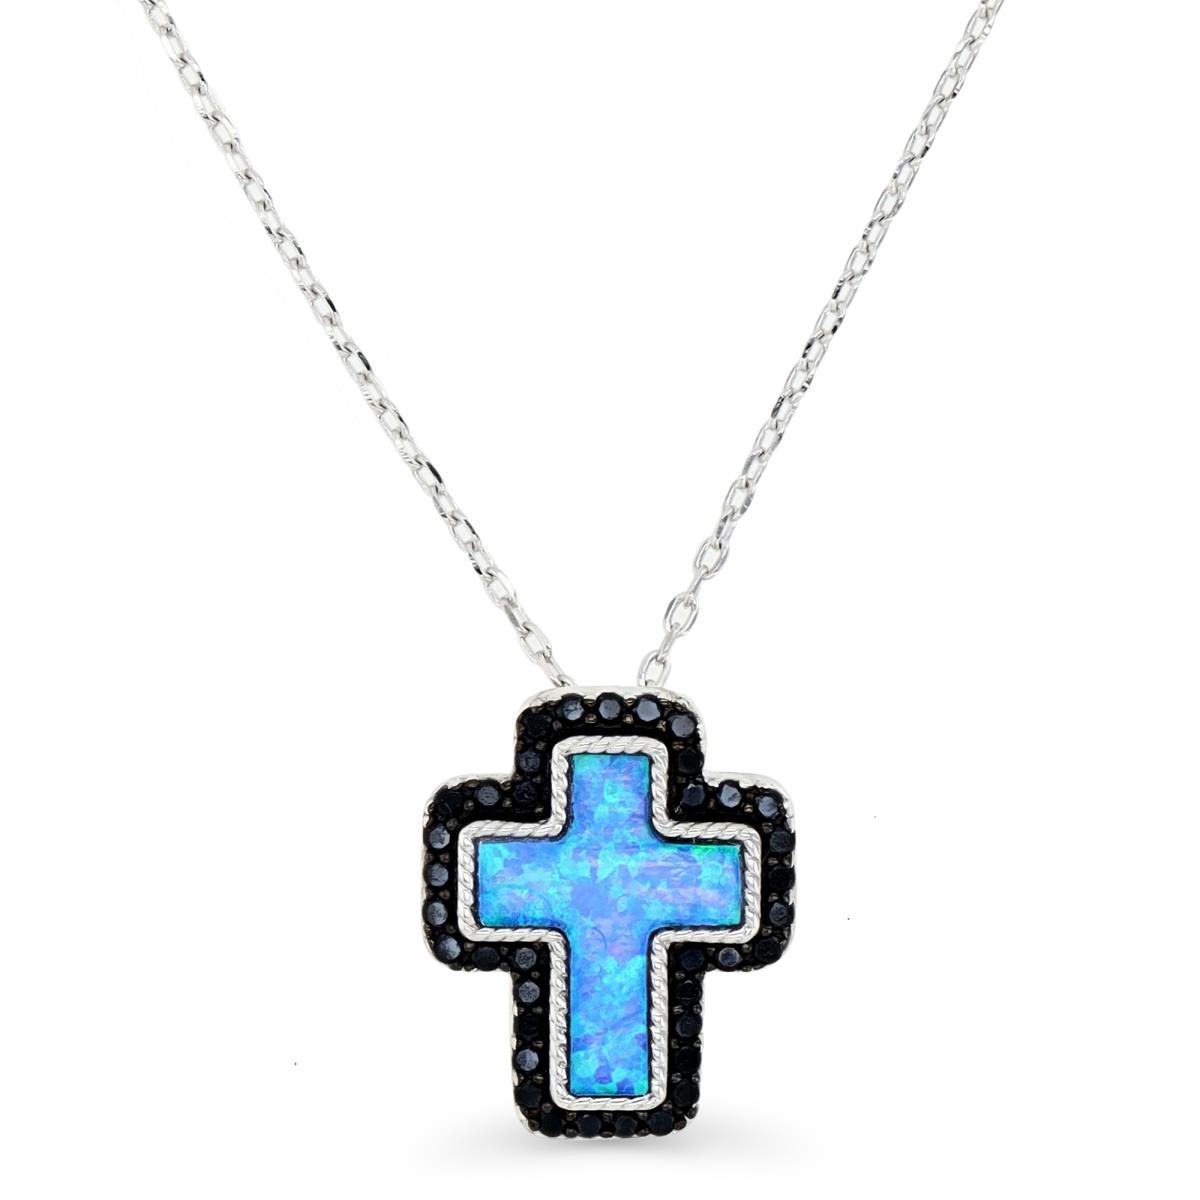  Sterling Silver Rhodium and Black & Cr. Blue Opal and Black Spinel Cross 16+2" Necklace